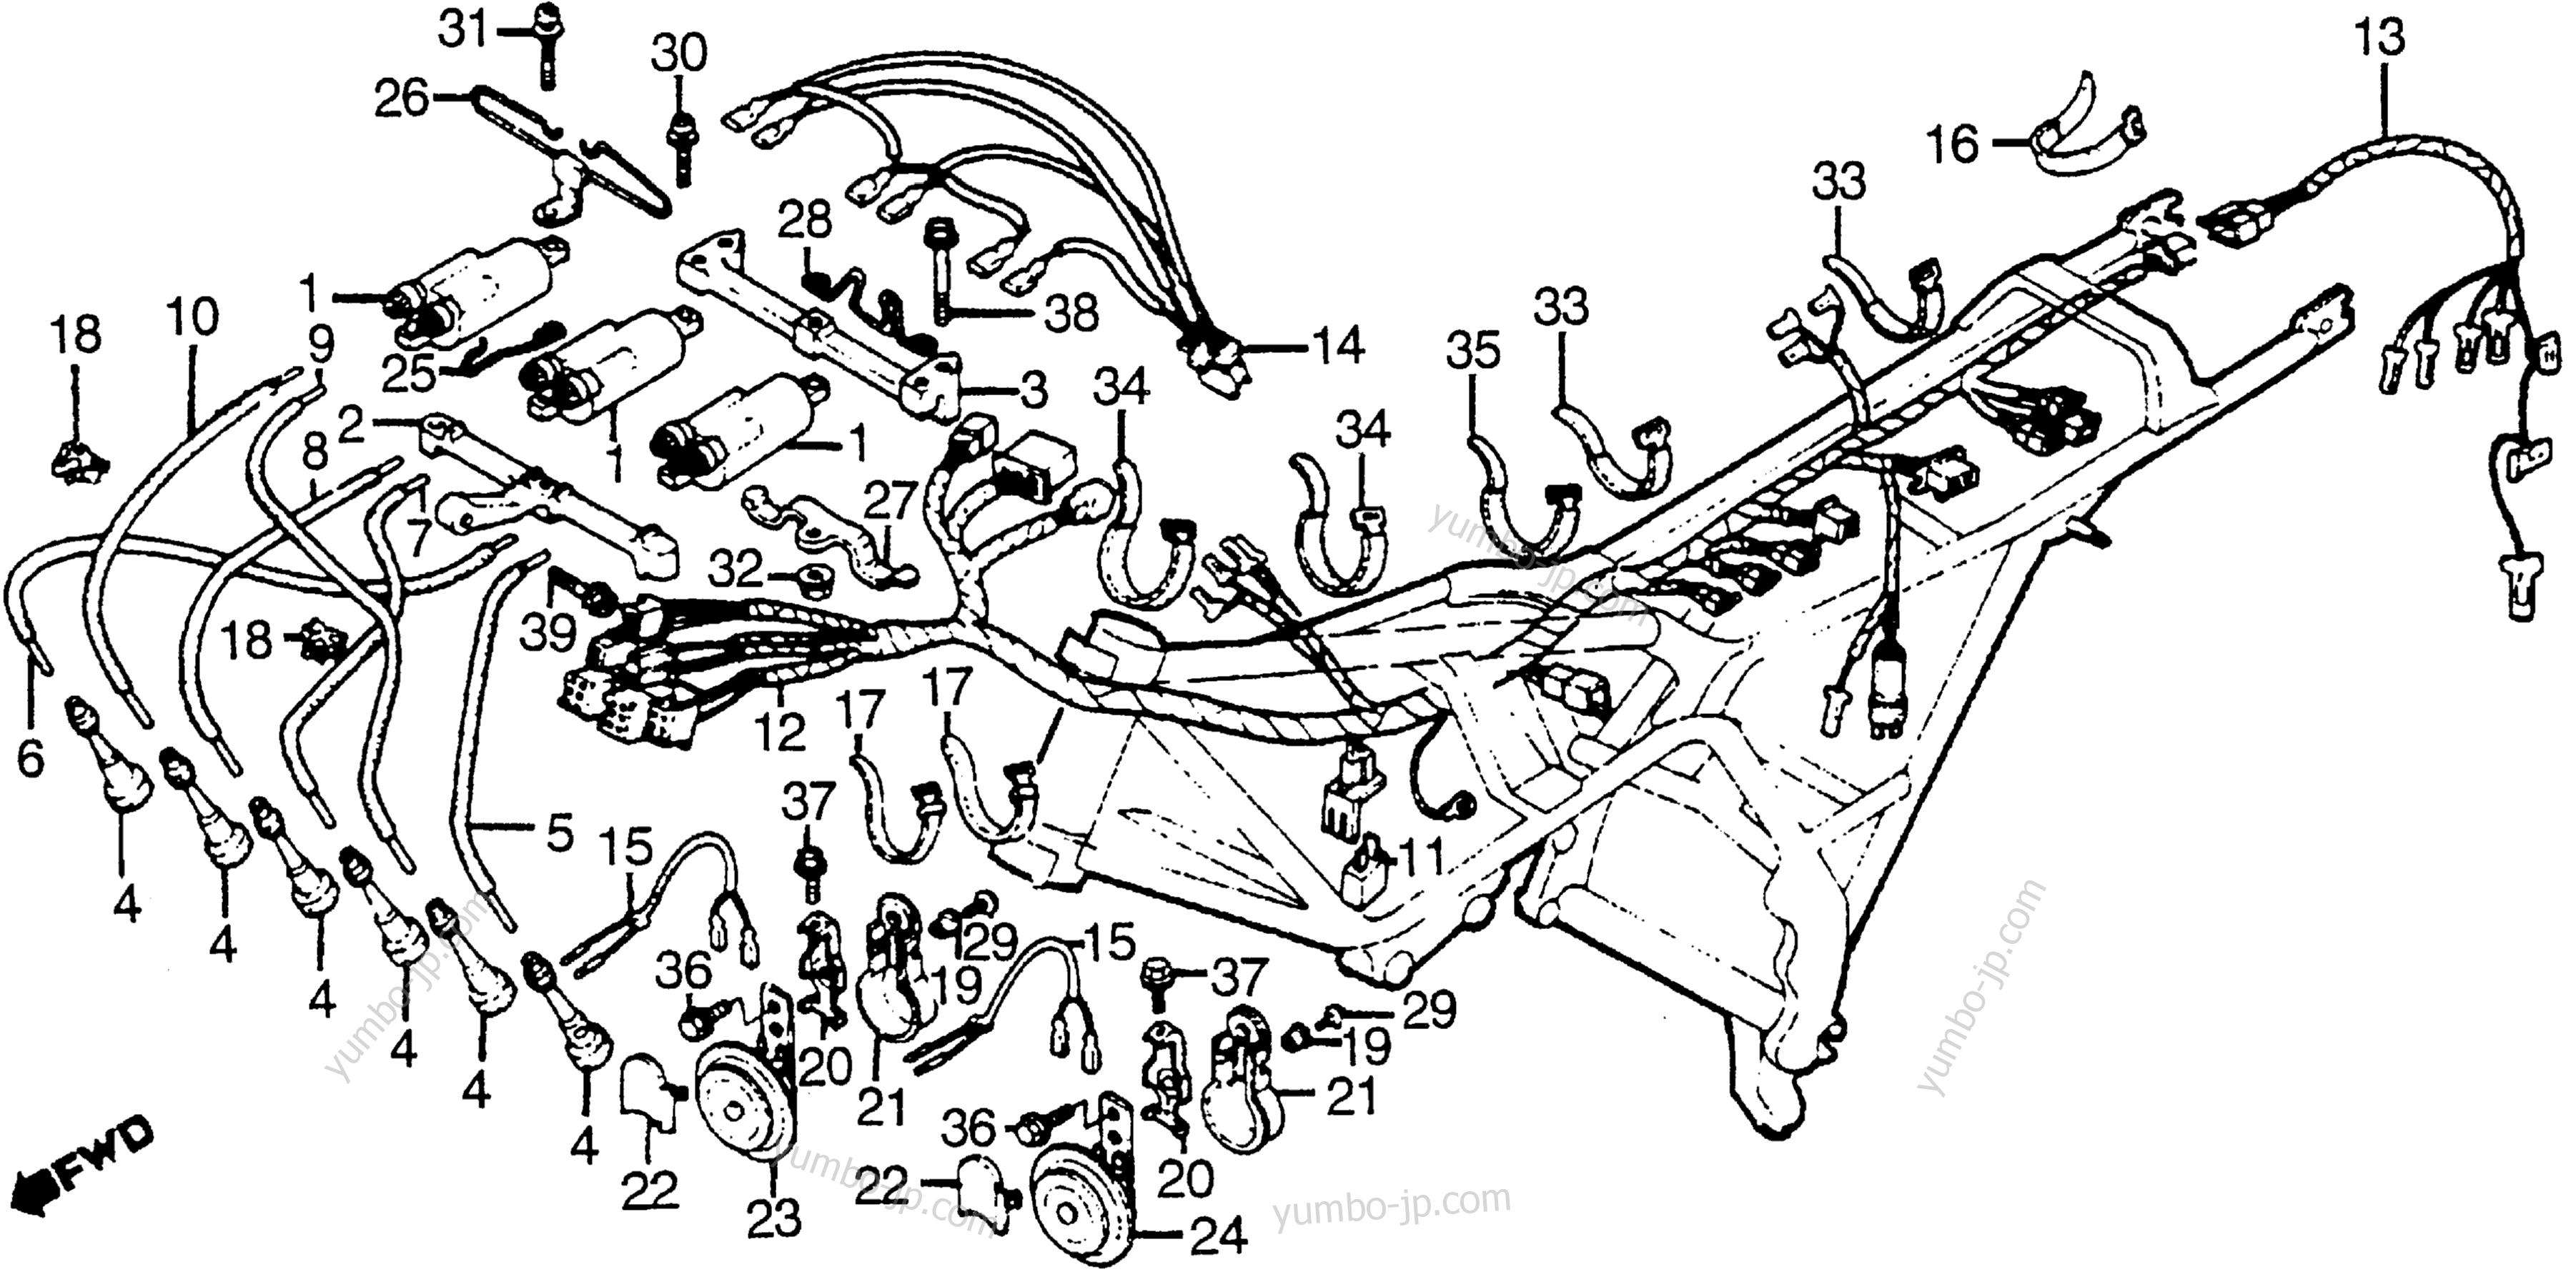 WIRE HARNESS for motorcycles HONDA CBX A 1981 year